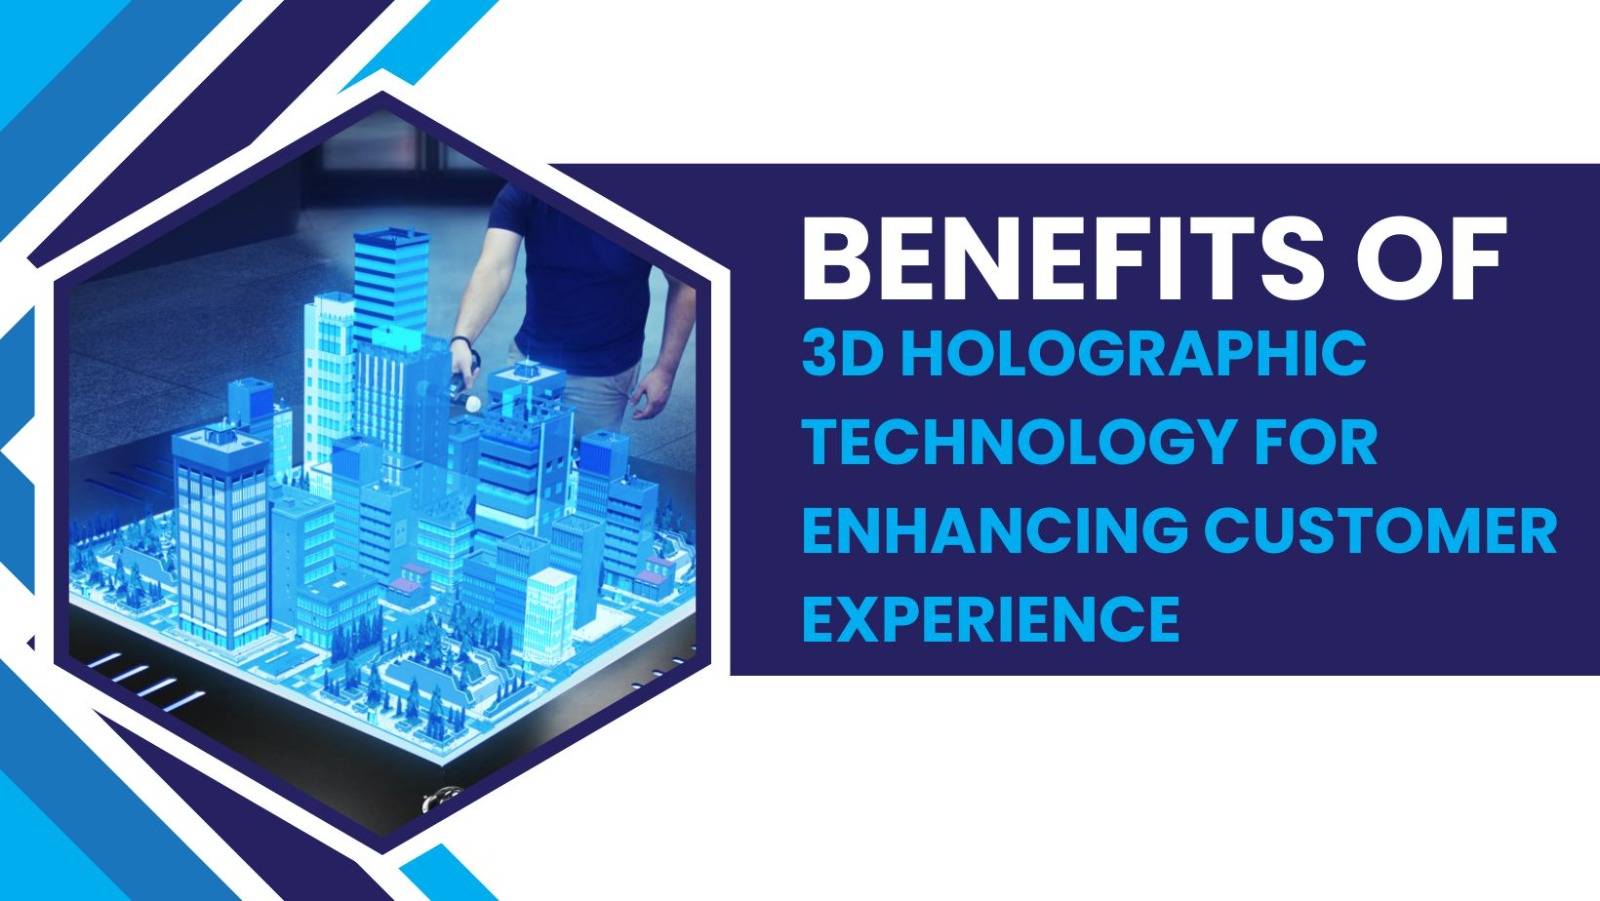 3D Holographic Technology